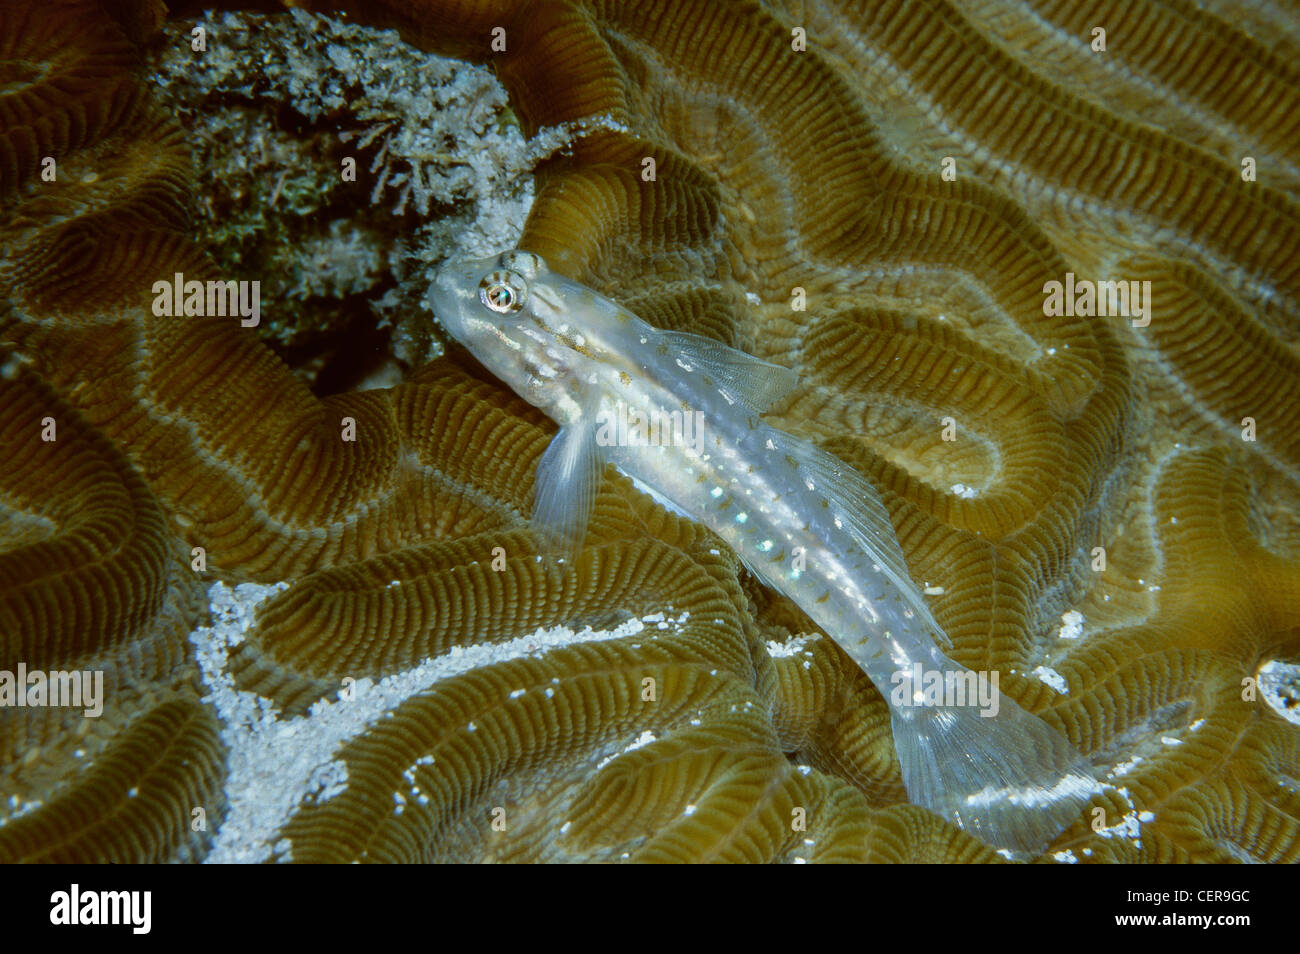 Bridled Goby,Coryphopterus glaucofraenum on coral reef in Belize Stock Photo